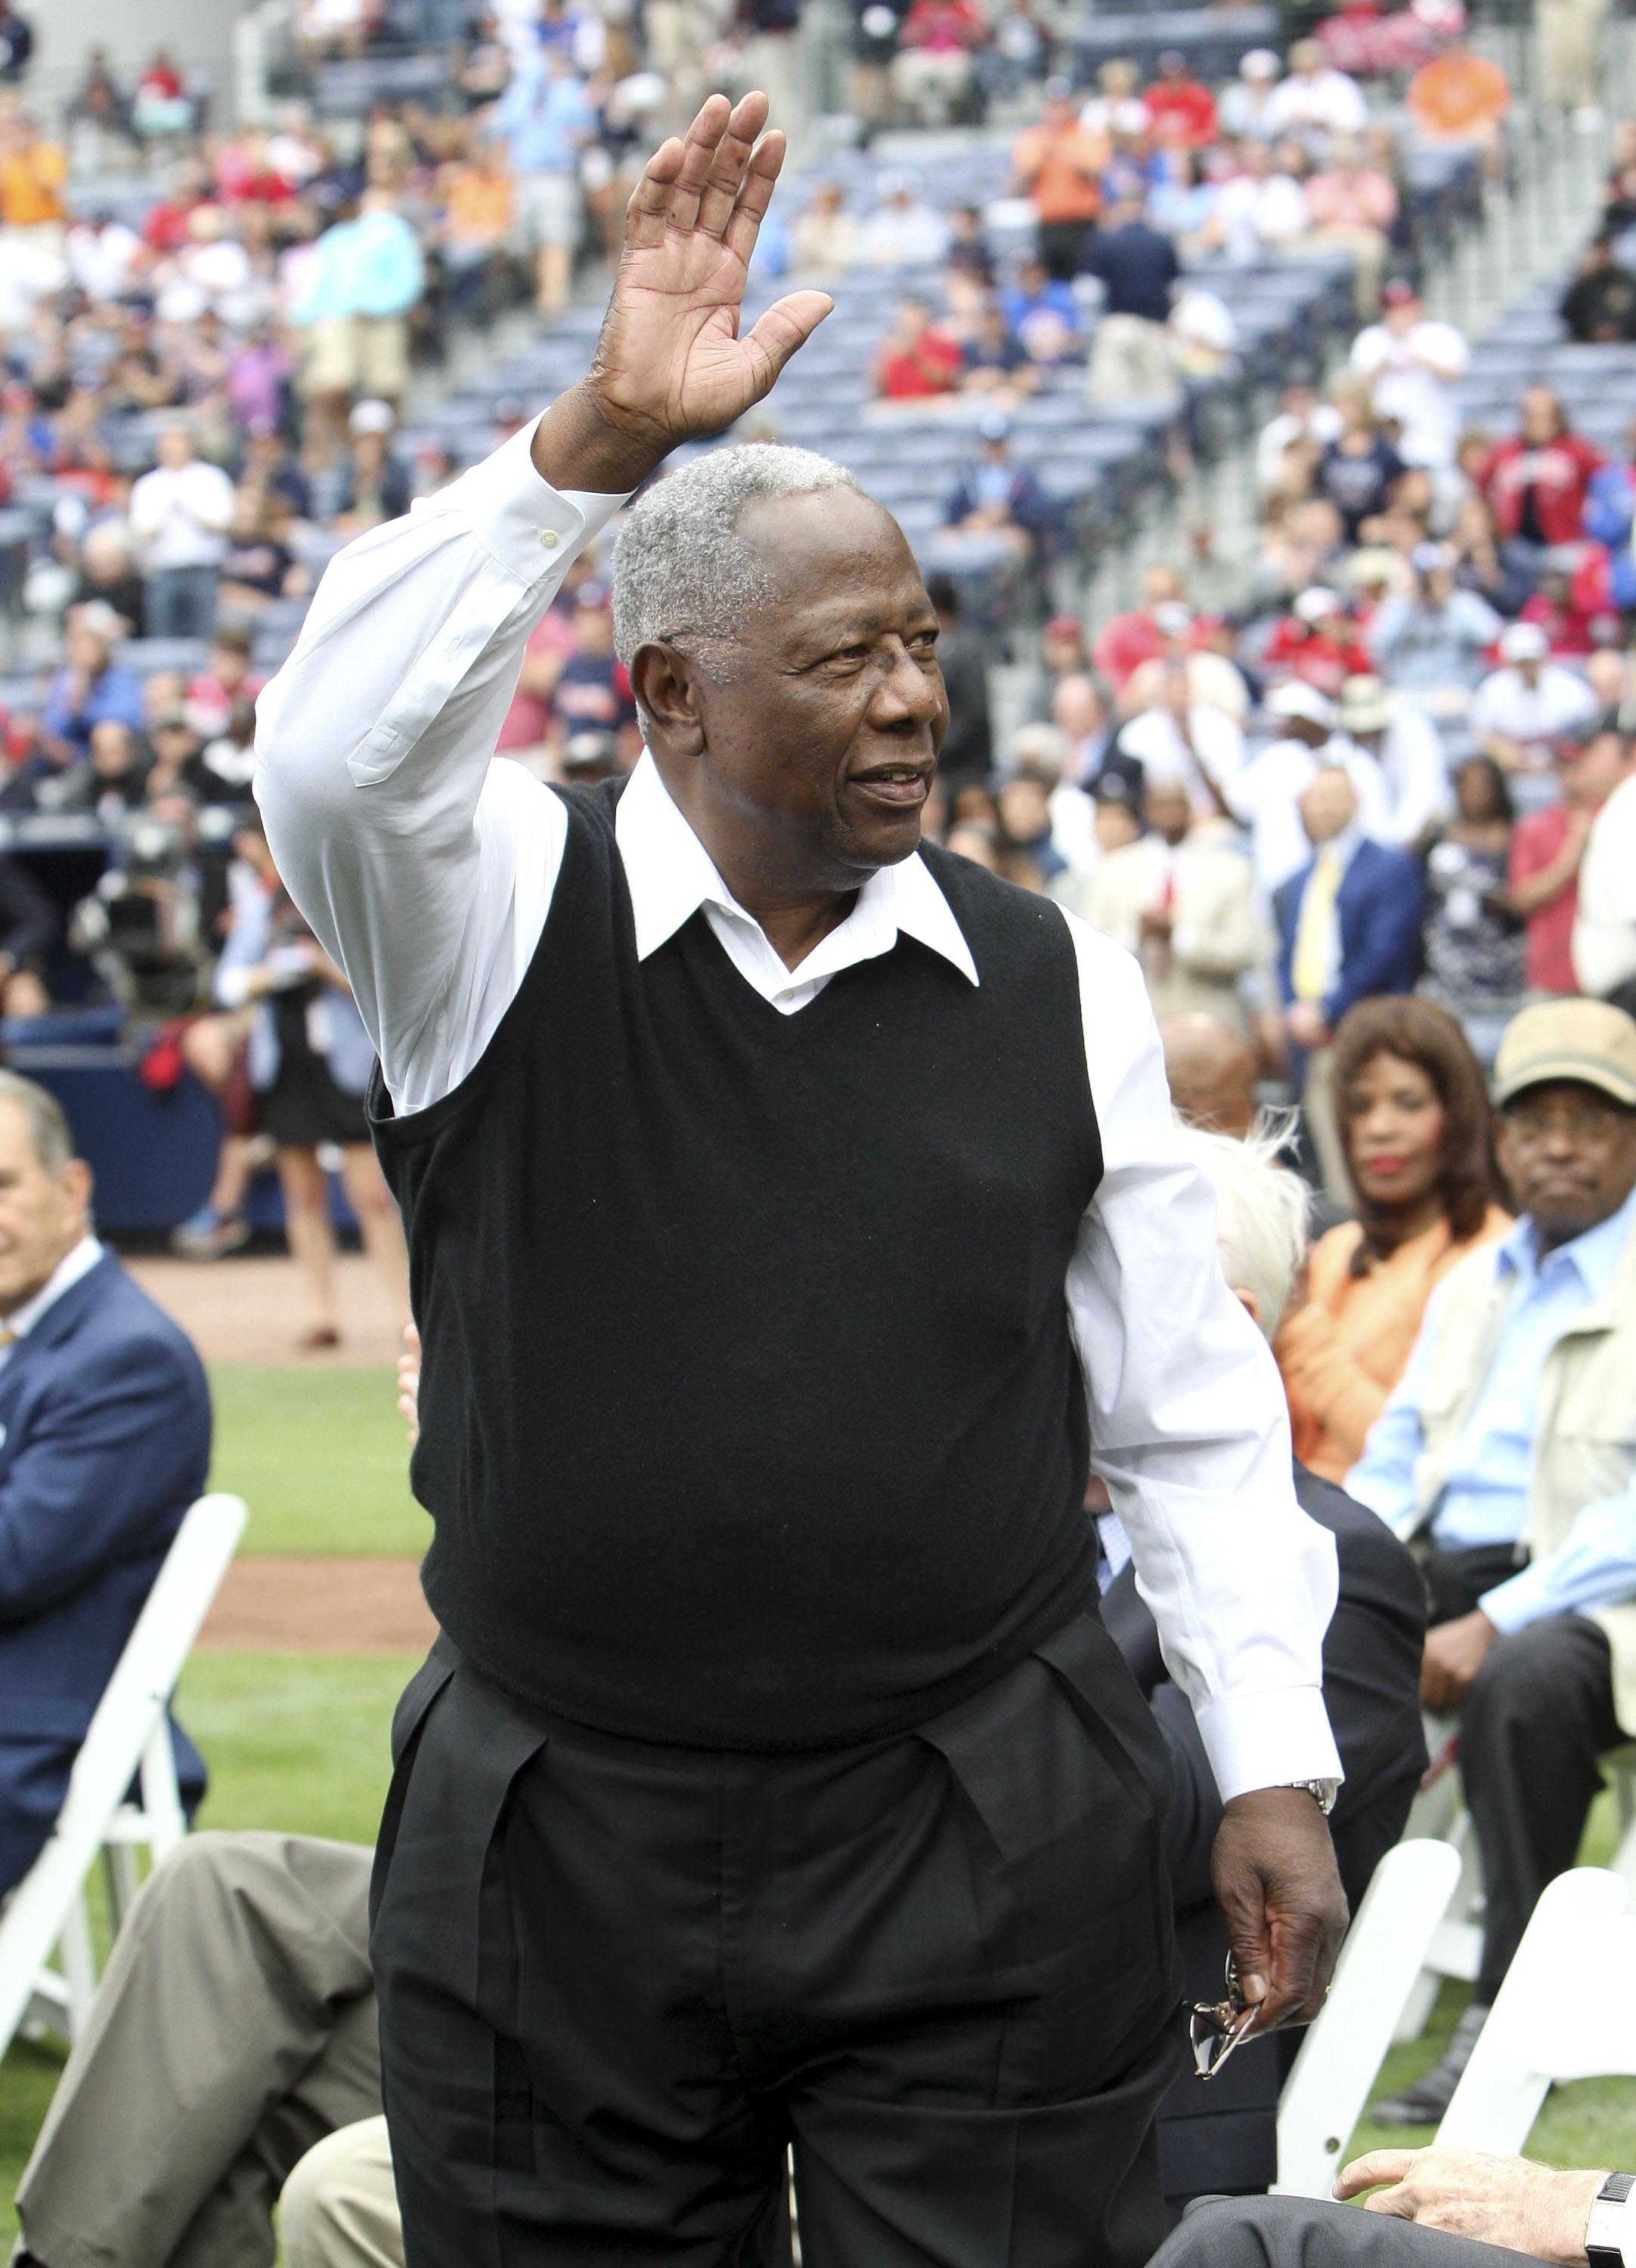 Celebrating Hank Aaron: 21 Facts About The Baseball Legend And